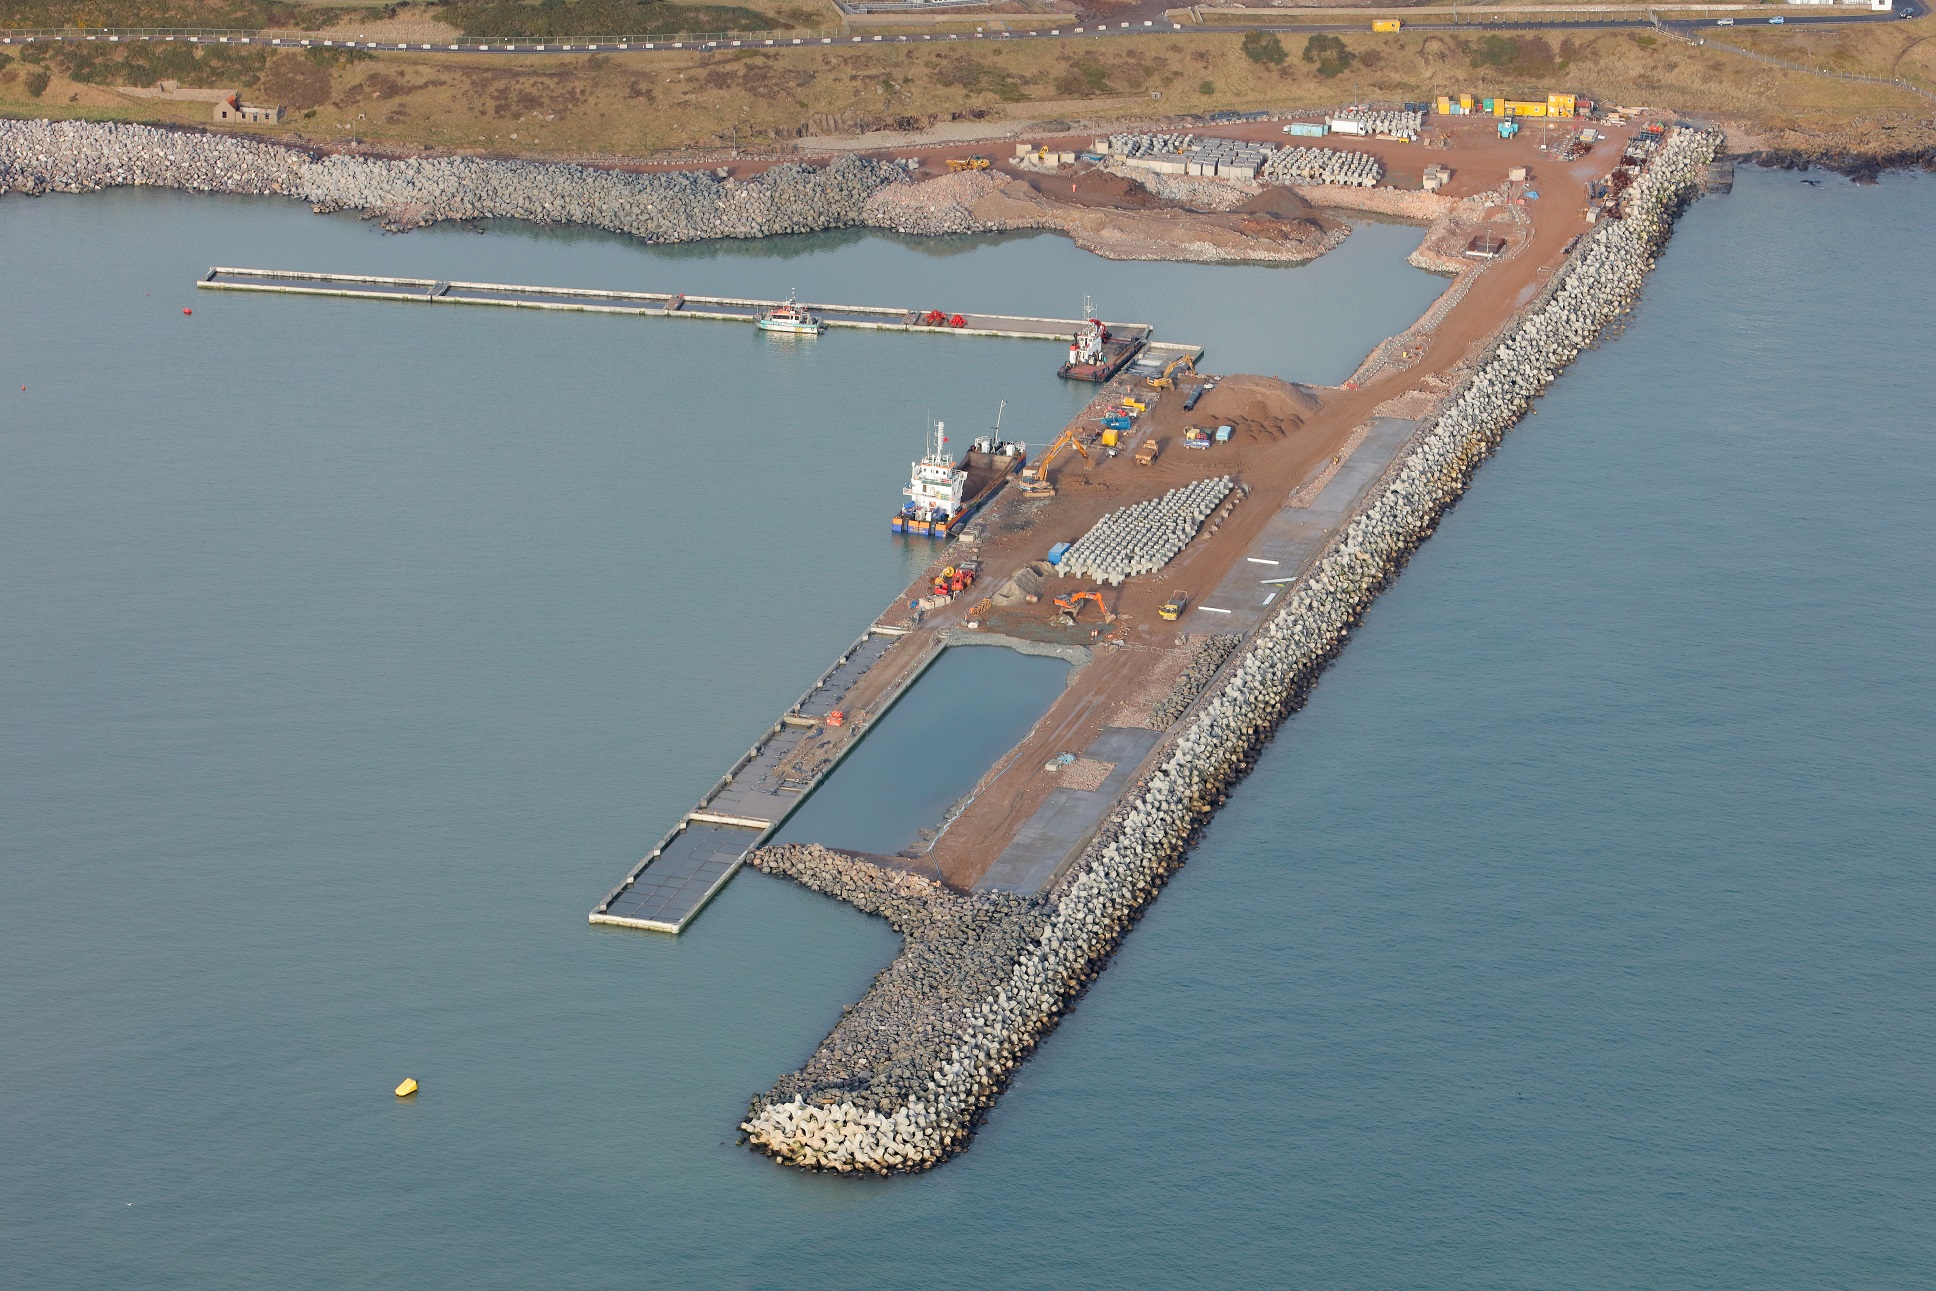 Aberdeen Harbour awards £4.3m of South Harbour Caisson Work